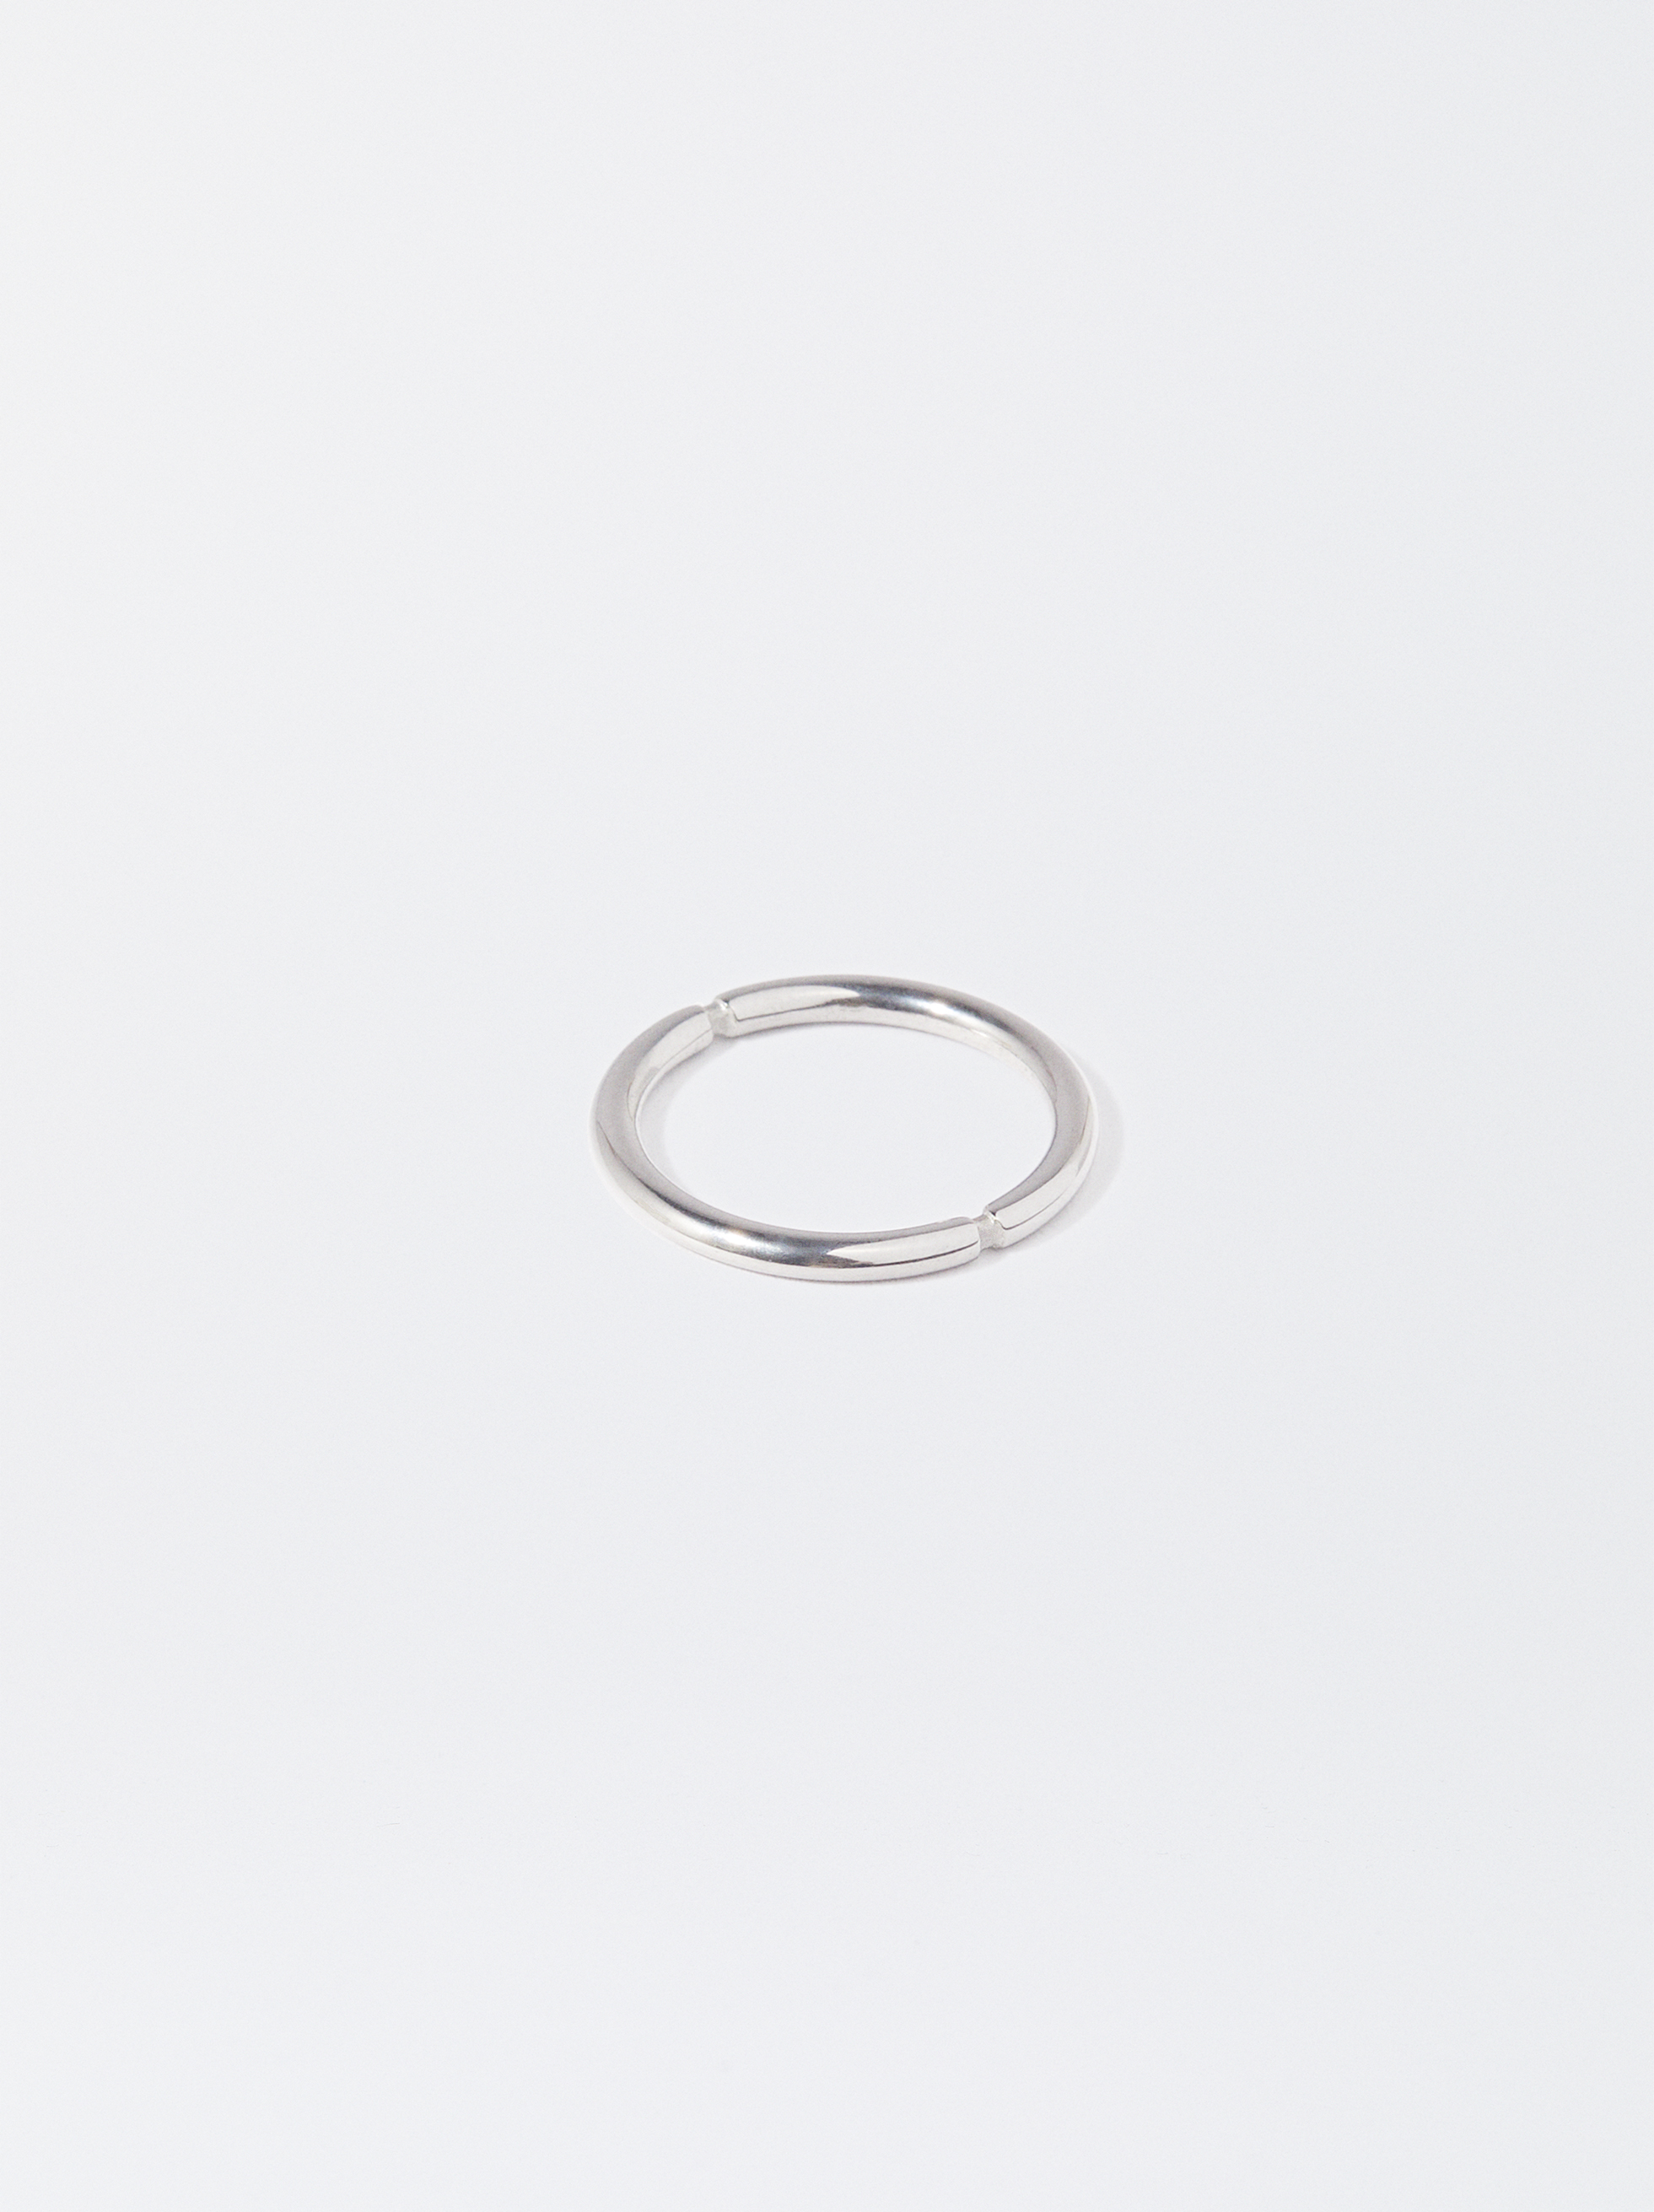 Silver Stainless Steel Ring image number 2.0